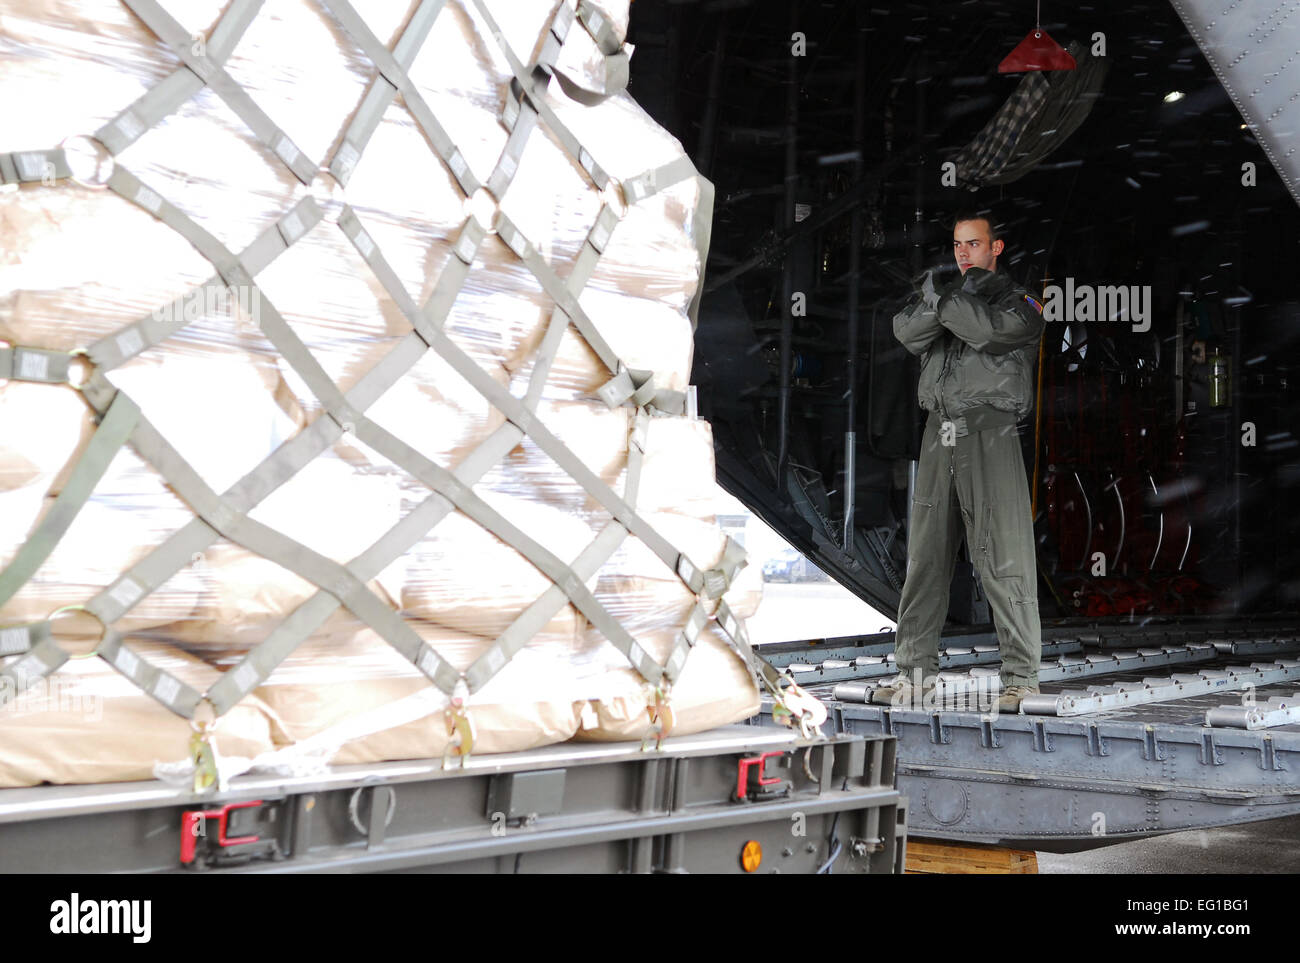 U.S. Air Force Senior Airman Brandon Lee, a 36th Airlift Squadron C-130 Hercules loadmaster from Yokota Air Base, Japan, guides a pallet with humanitarian relief supplies onto a C-130 cargo aircraft at Chitose Air Base, Japan, March 23, 2011. The aircraft transported six pallets carrying 15,000 pounds of blankets, water and rice from the air base to Matsushima, Japan.  Staff Sgt. Robin Stanchak Stock Photo